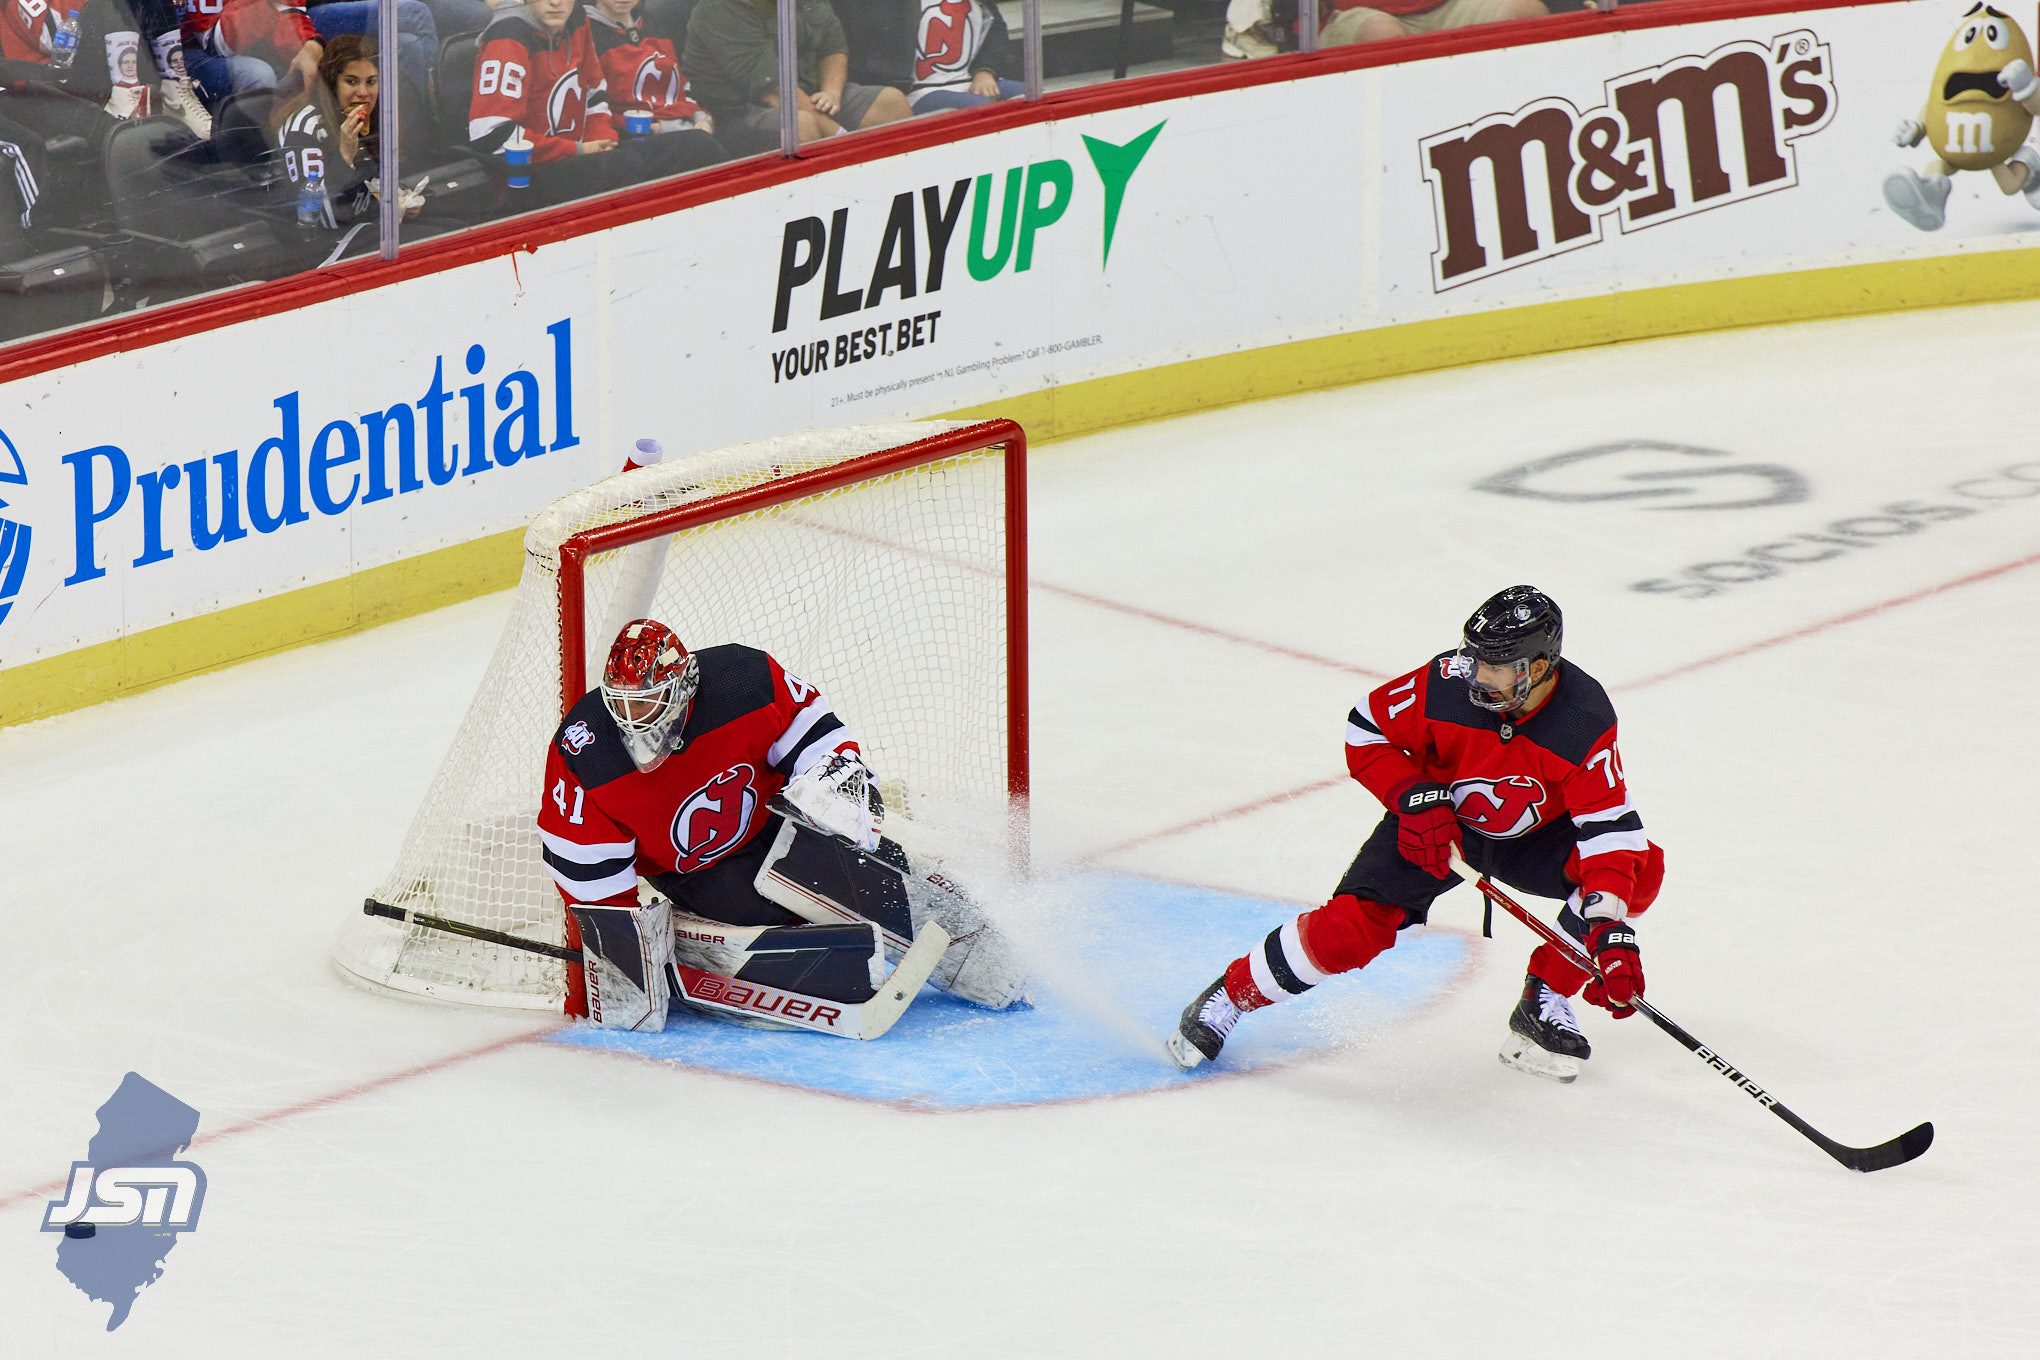 Devils stun Rangers in OT in Game 3 to get back into series